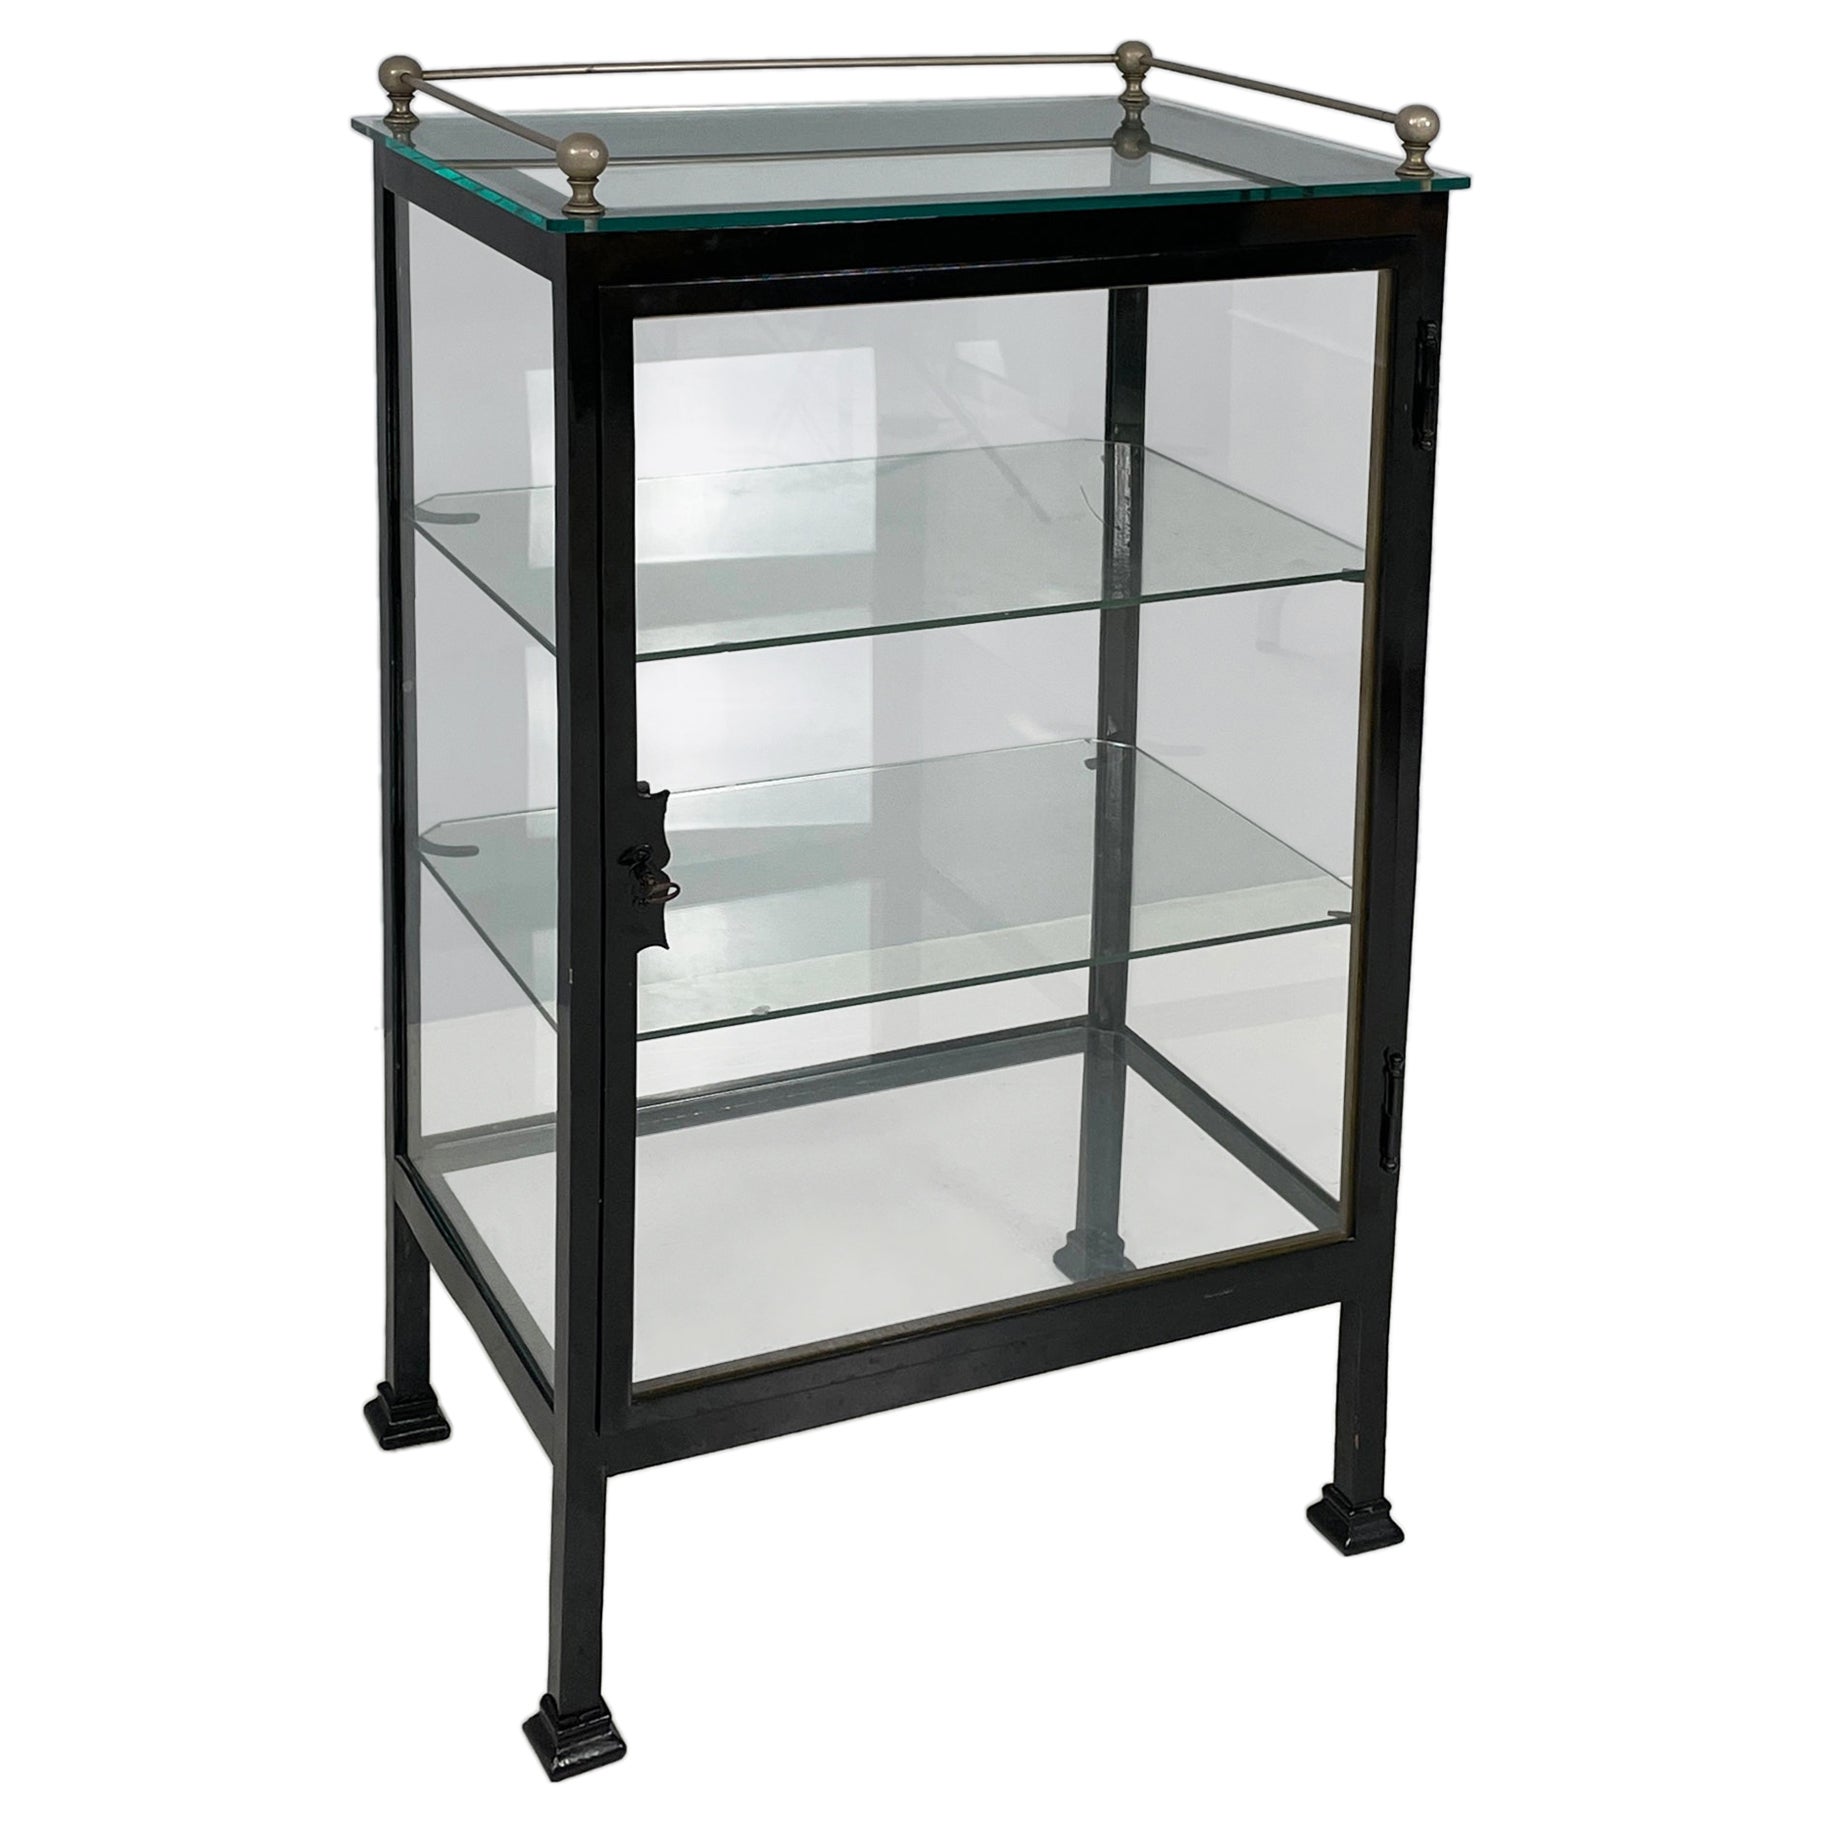 Italian antique Display cabinet in glass and black metal, early 1900s